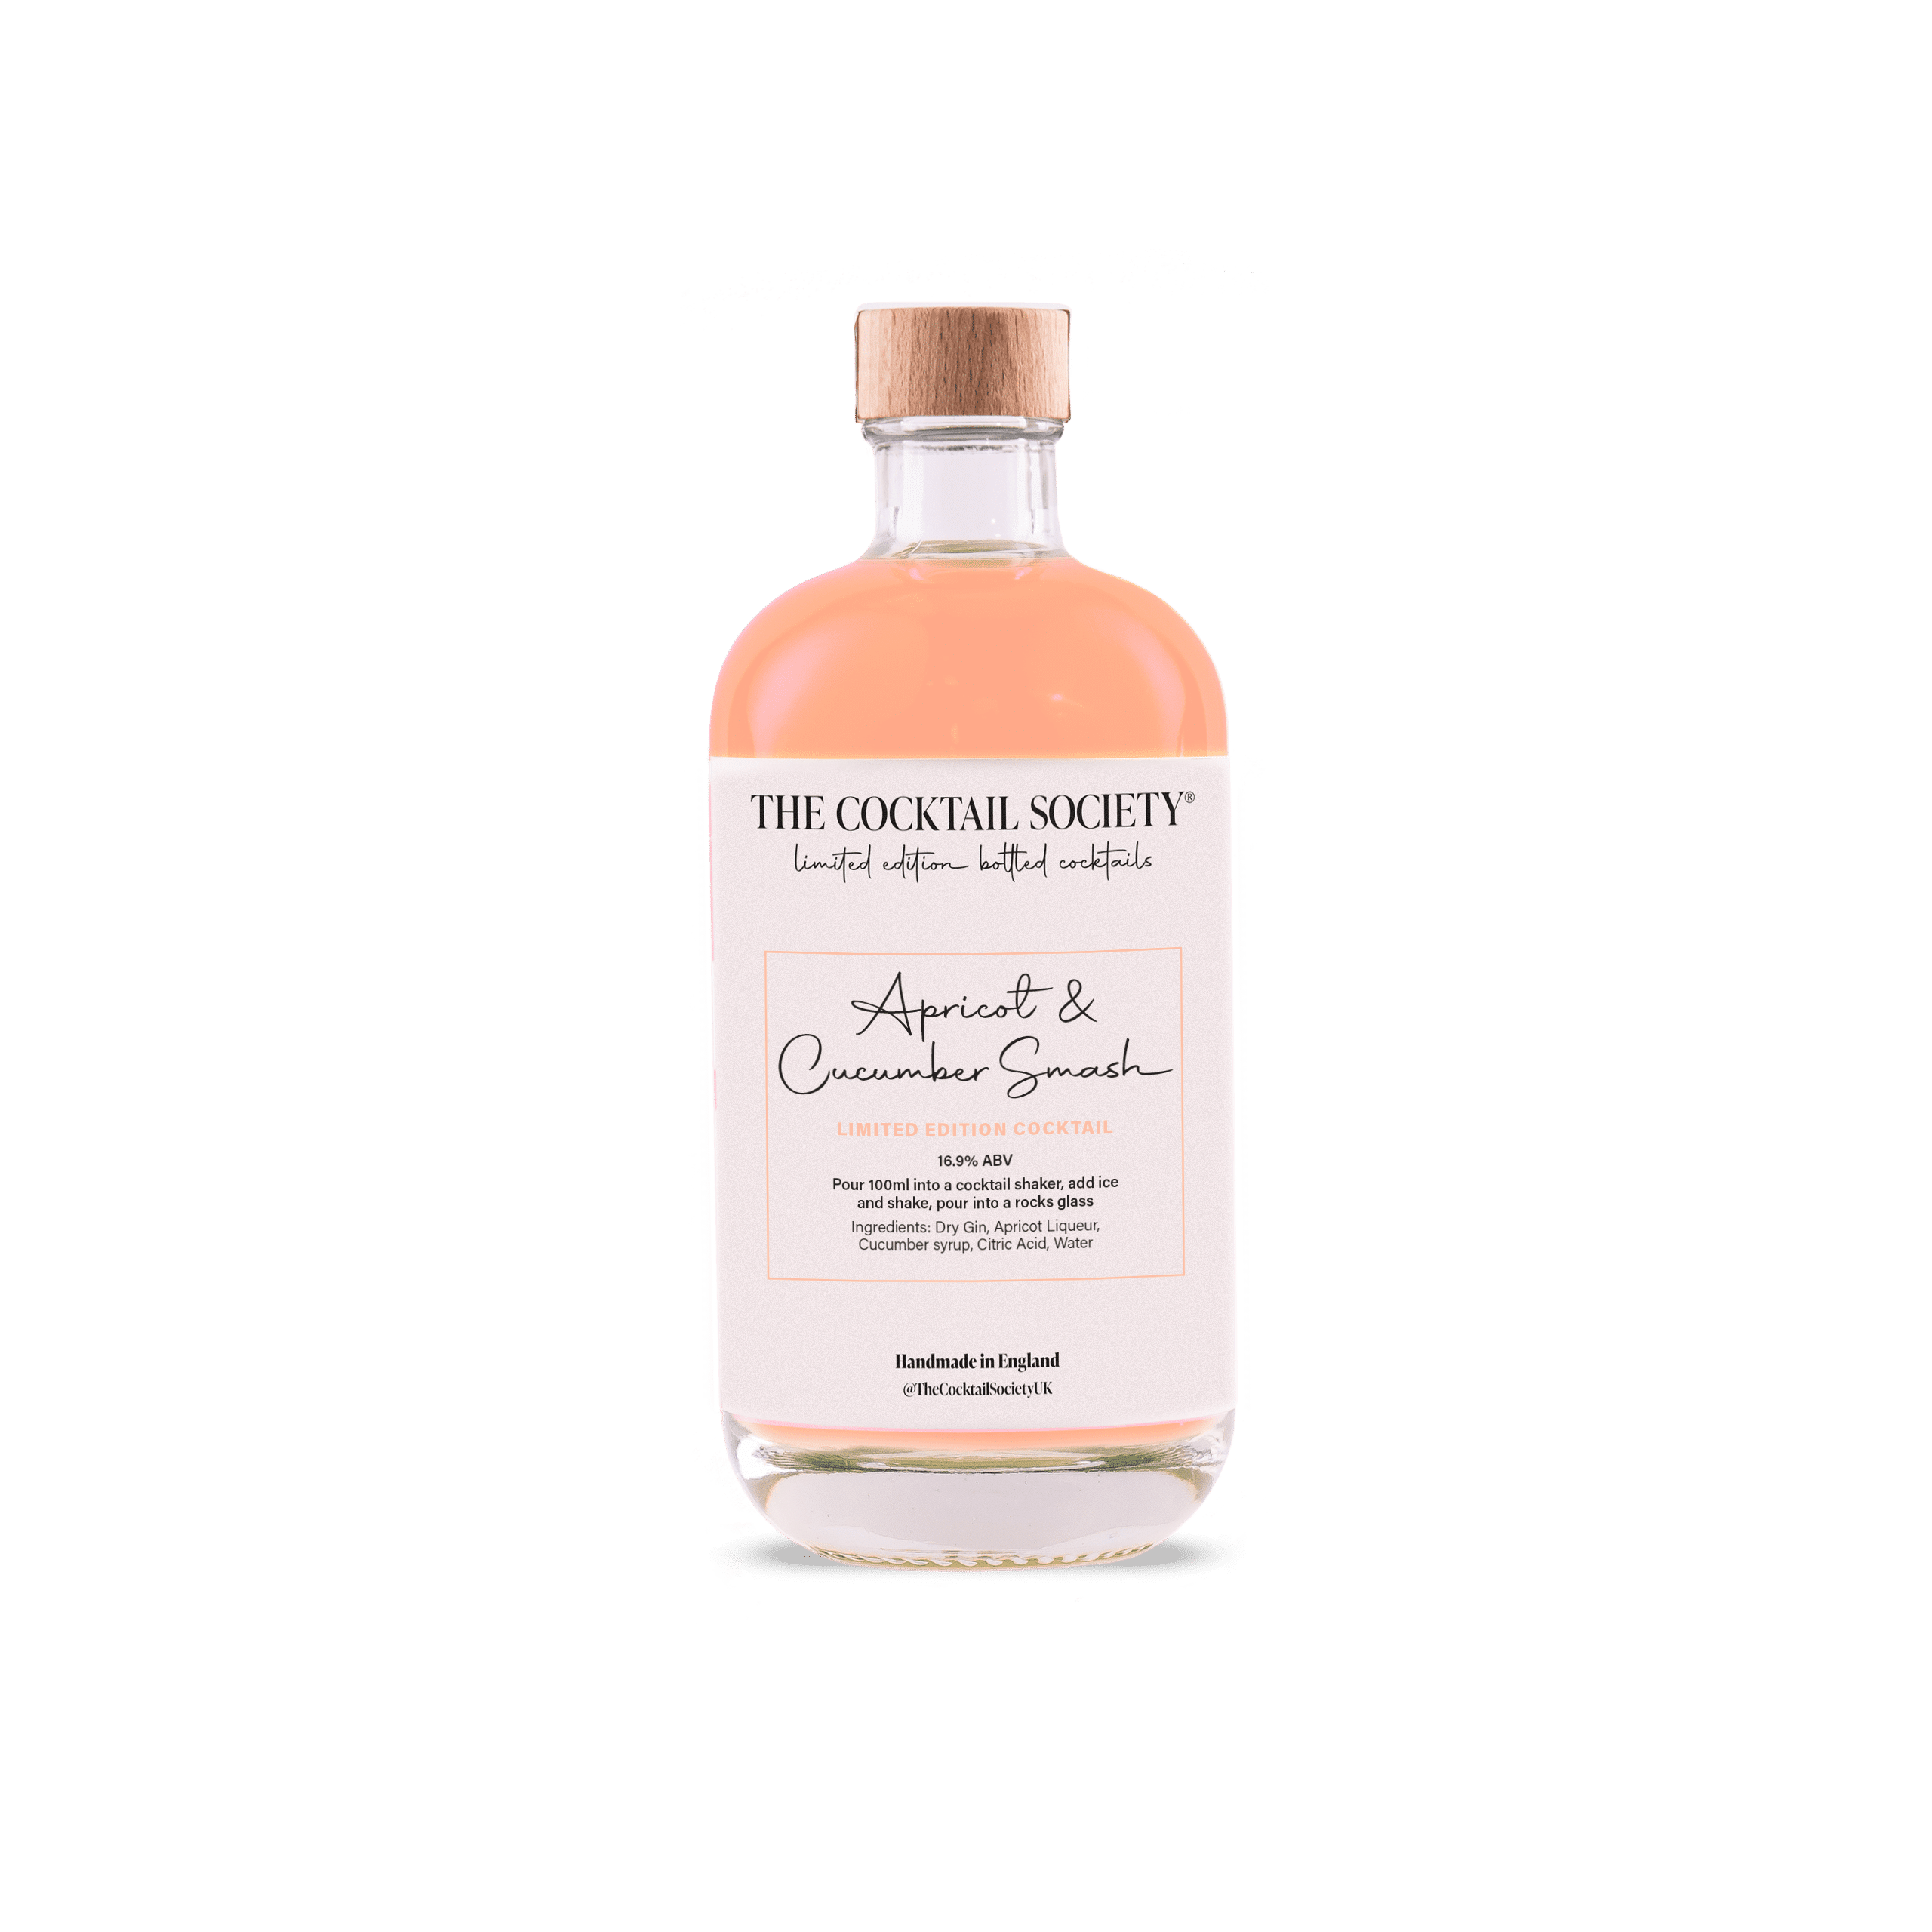 Apricot and cucumber smash bottled cocktail